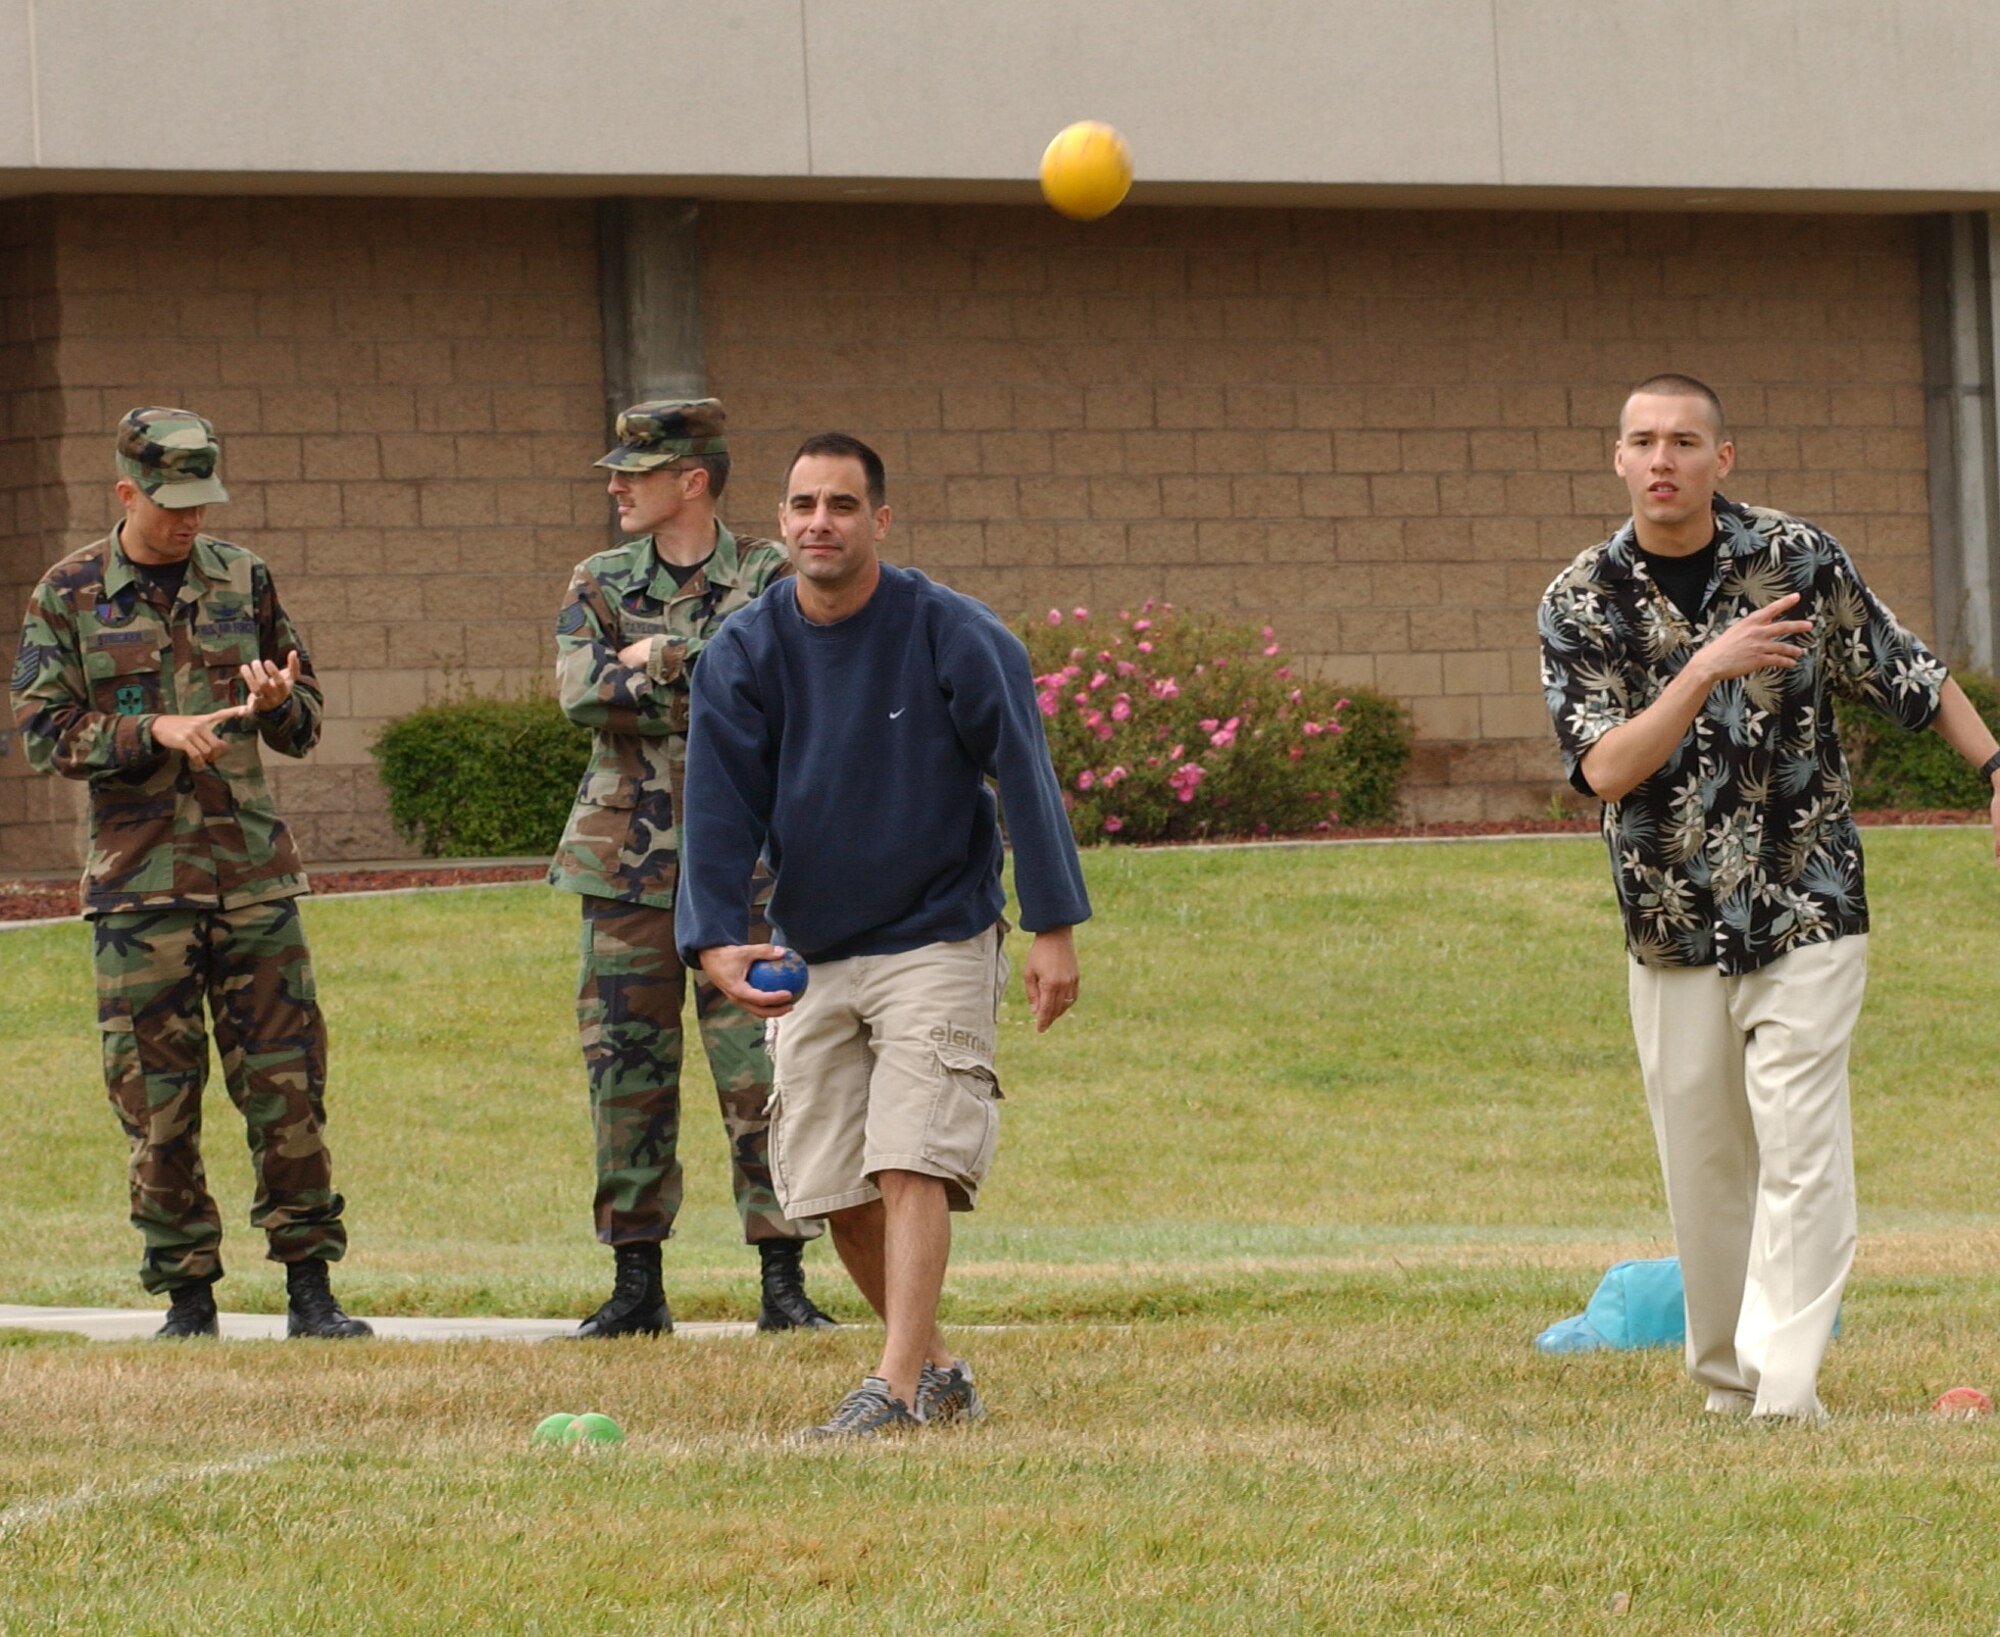 Airman Jonathan Fernandez, 392nd Training Squadron, bowls for his team, Strawberry Annihilation, in the first round of the Combat Bocce Ball Tournament here May 4. The event was put on as one of the 381st TRG quarterly events to ensure morale stays high. (U.S. Air Force Photo by Nichelle Griffiths)